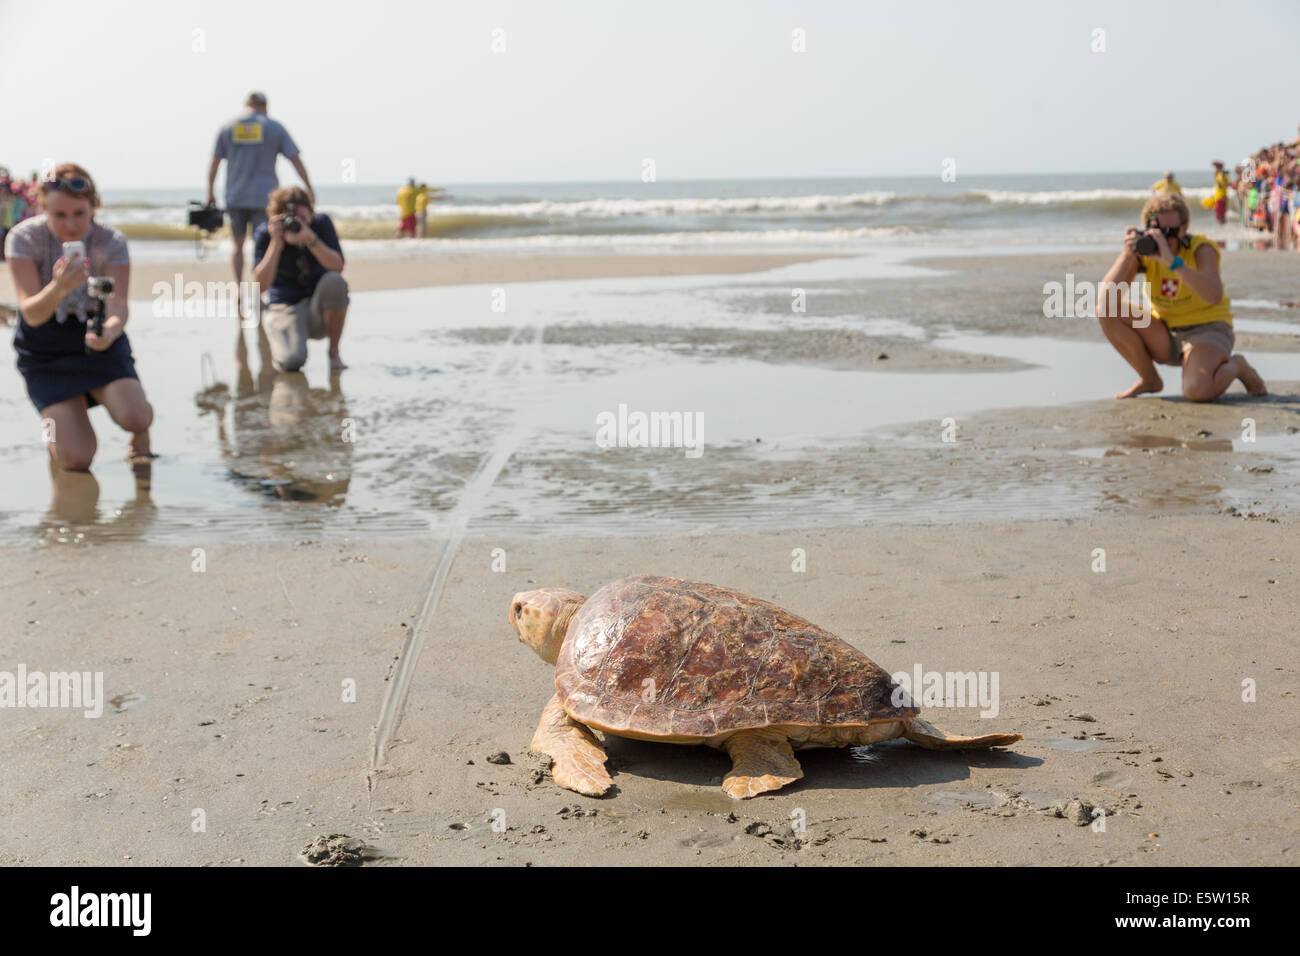 Mitchell, a 65-pound juvenile loggerhead sea turtle crawls back to the ocean during the release of rehabilitated sea turtles August 6, 2014 in Isle of Palms, South Carolina. The turtle was found entangled in a fishing line, malnourished and covered in barnacles and rehabilitated by the sea turtle hospital at the South Carolina Aquarium in Charleston. Stock Photo